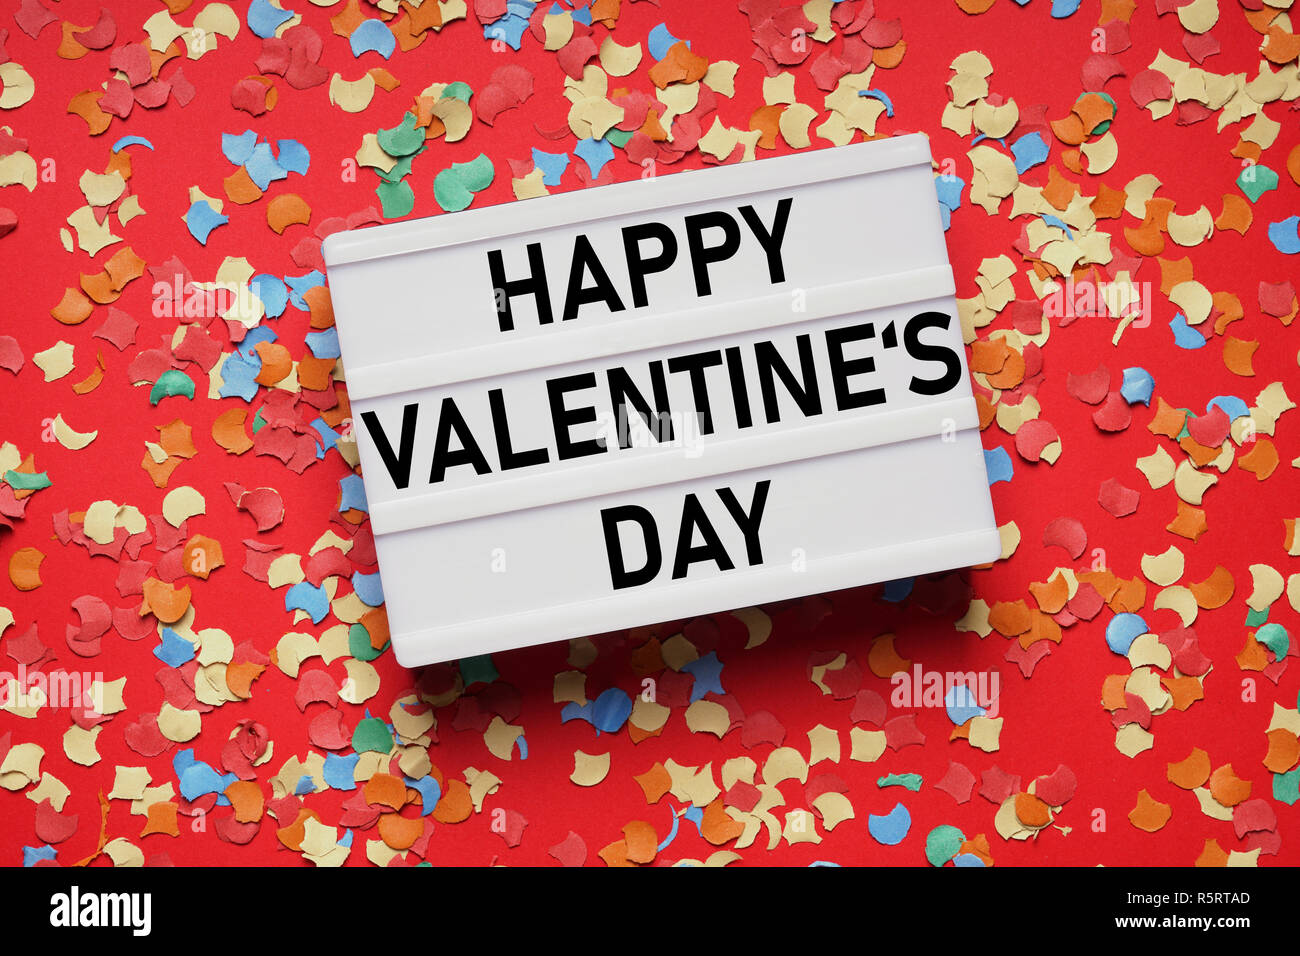 valentines day lightbox sign on red paper background with confetti Stock Photo